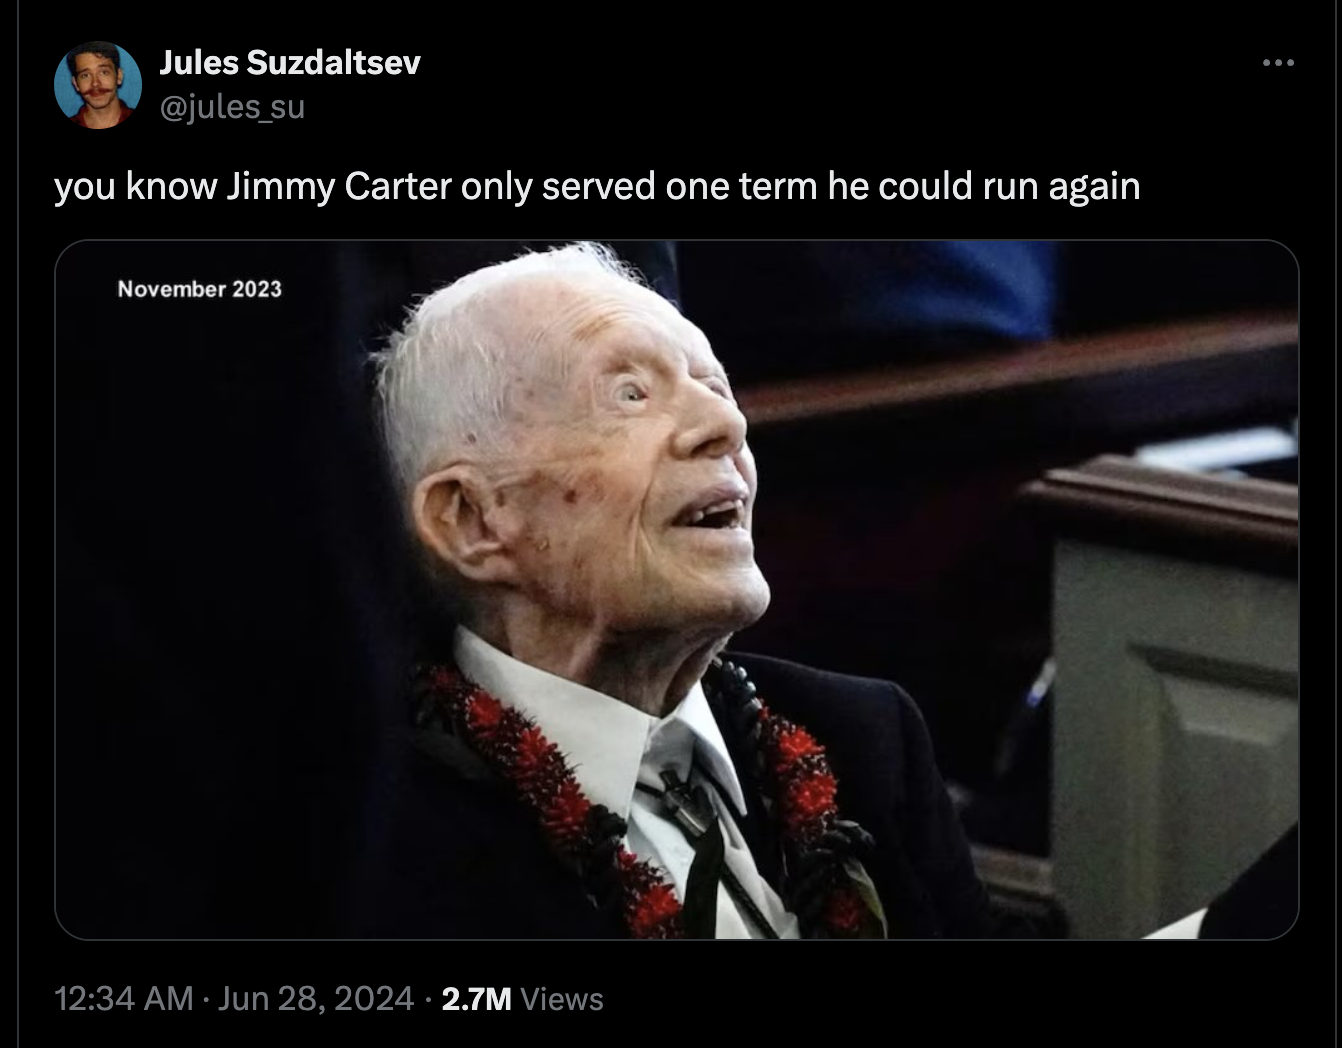 jimmy carter - Jules Suzdaltsev you know Jimmy Carter only served one term he could run again 2.7M Views